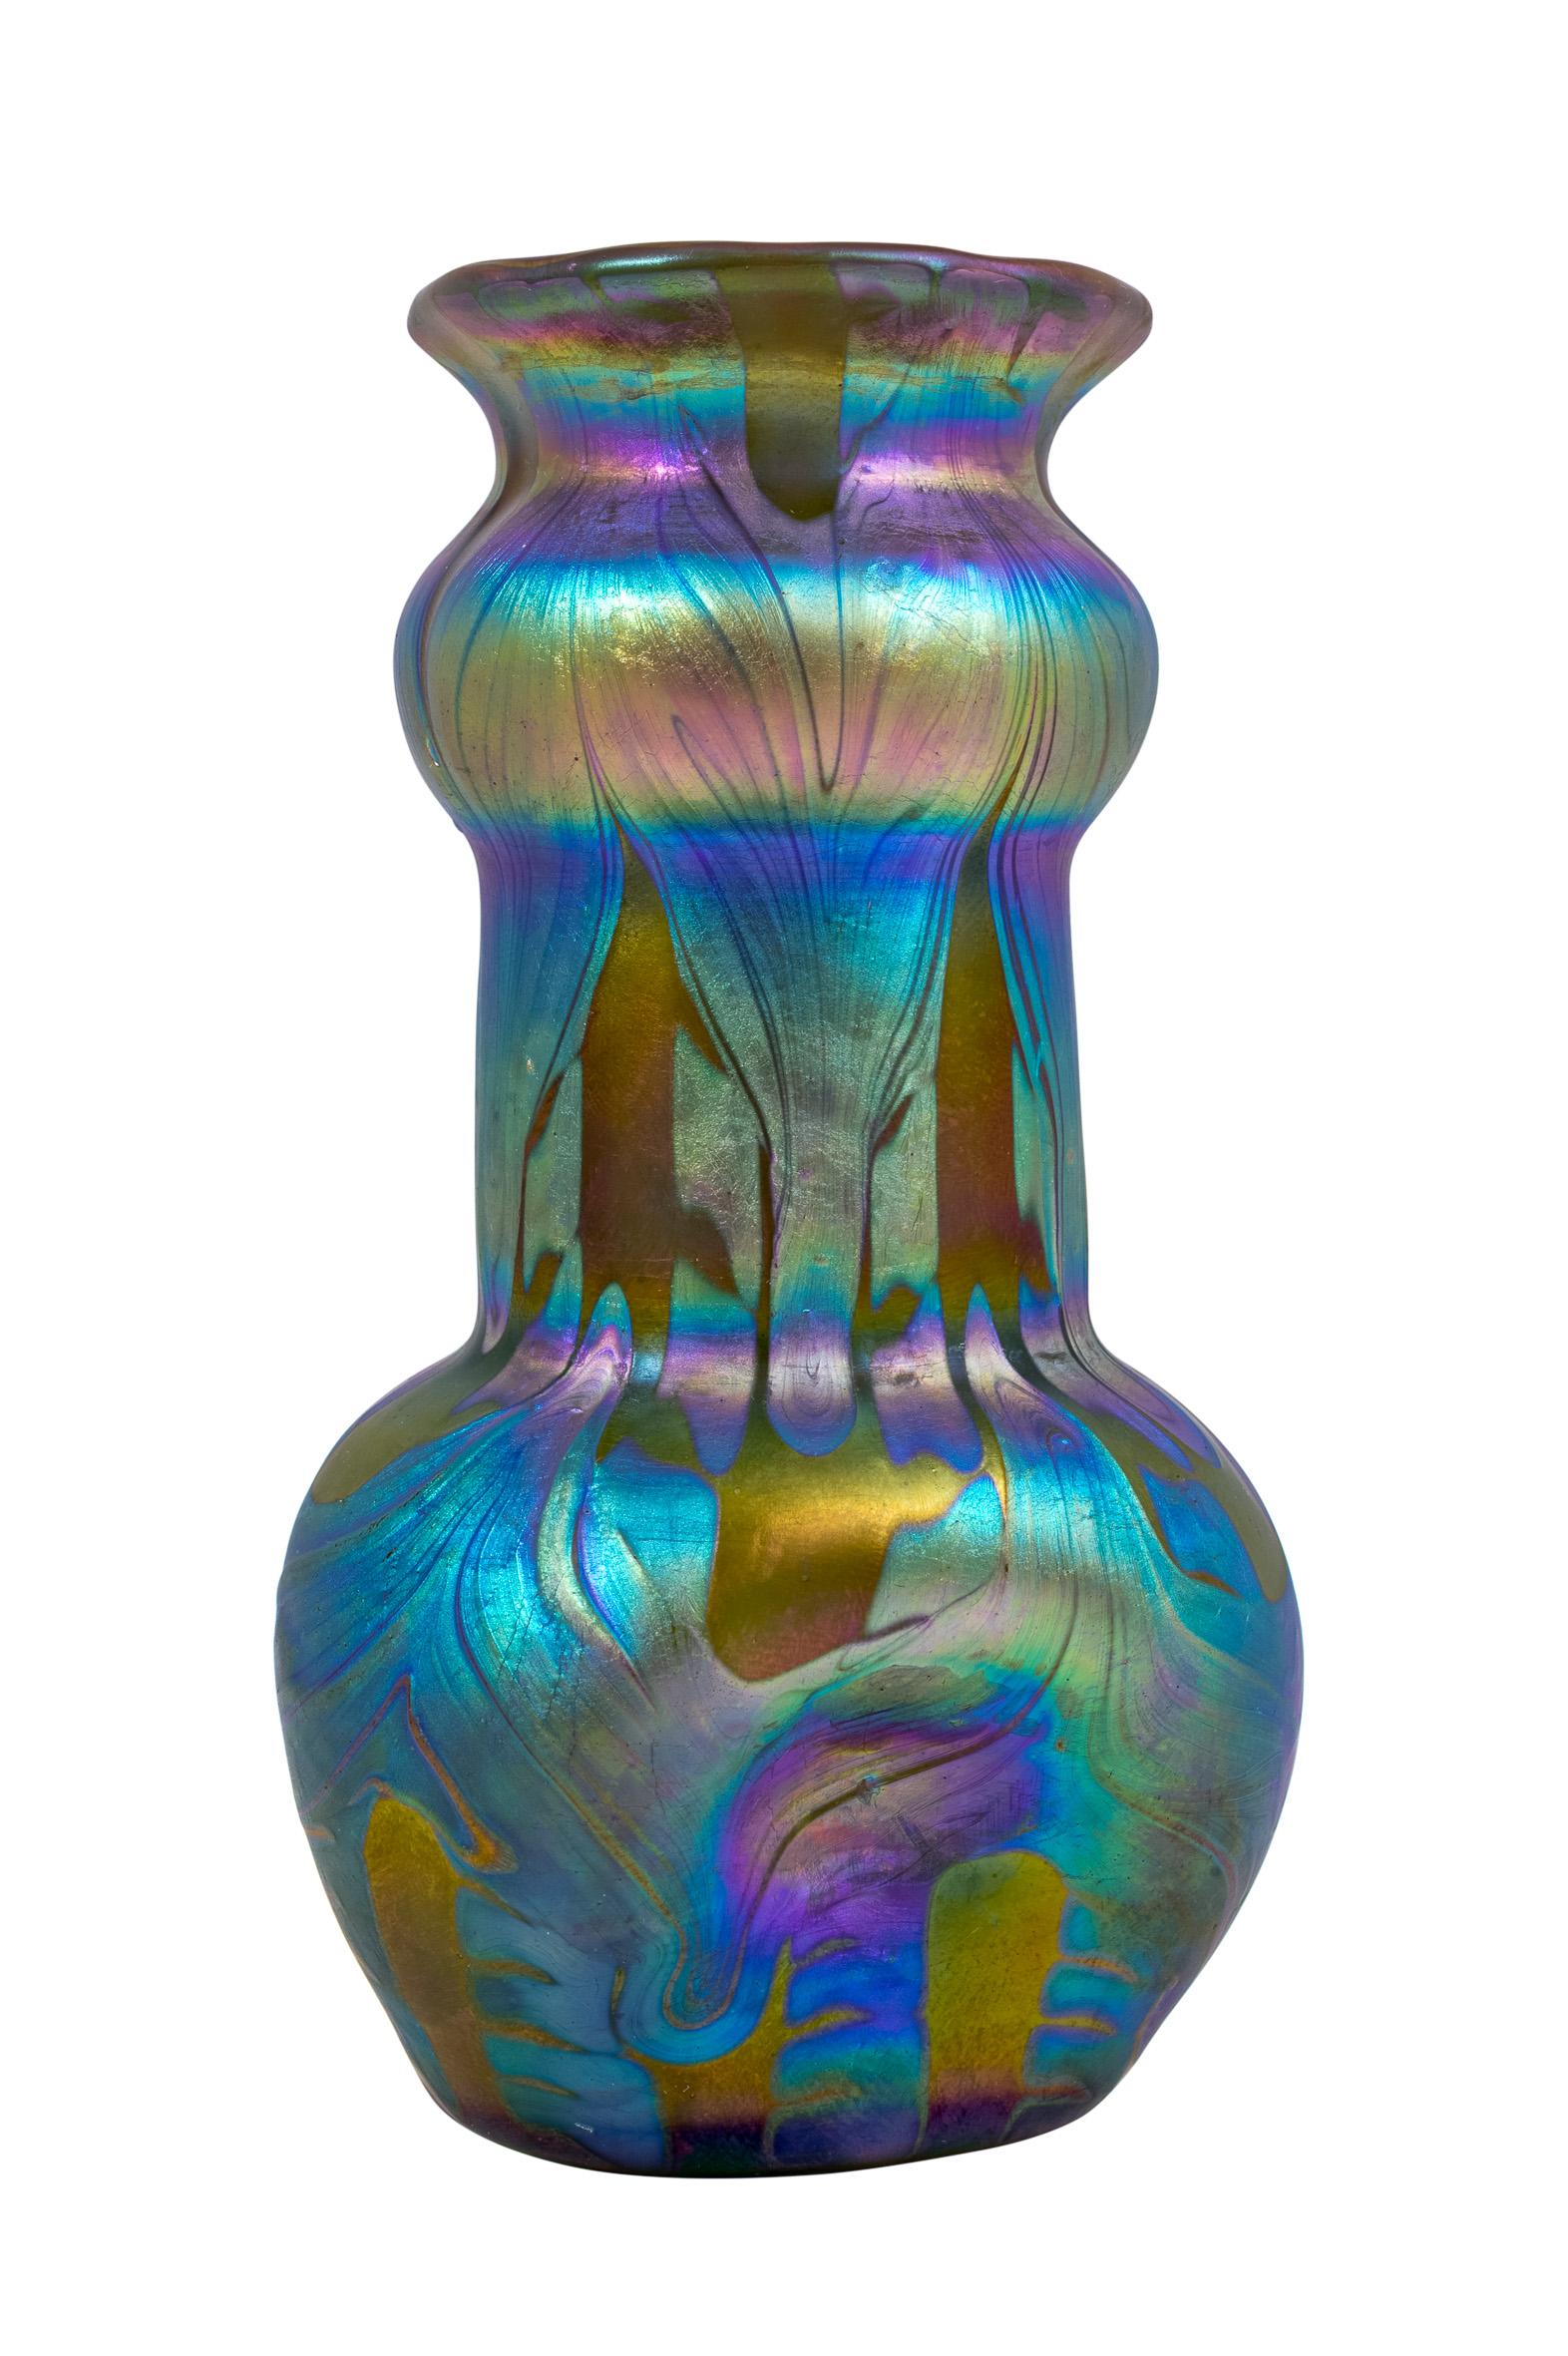 Glass vase manufactured by Johann Loetz Witwe PG 1/158 decoration ca. 1901 Austrian Jugendstil

This vase is an excellently preserved and exquisite specimen, which illustrates the high art of glassblowing from the manufacturer Loetz. The